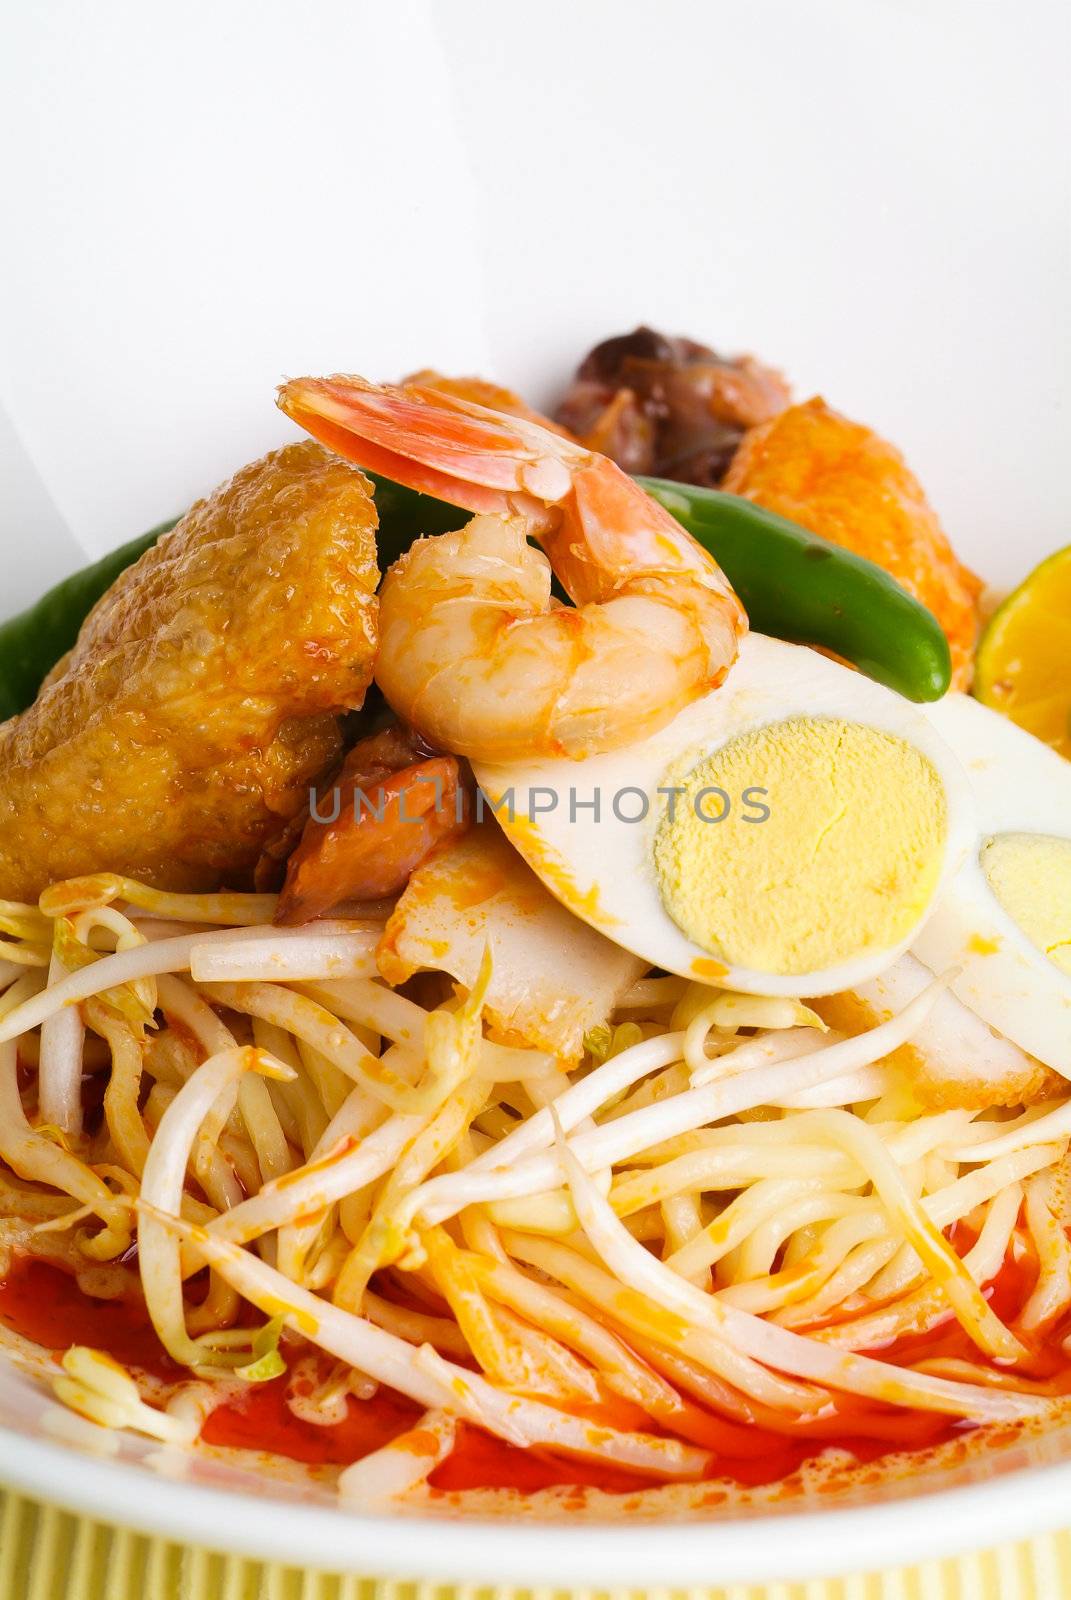 Curry Laksa which is a popular traditional spicy noodle soup fro by heinteh